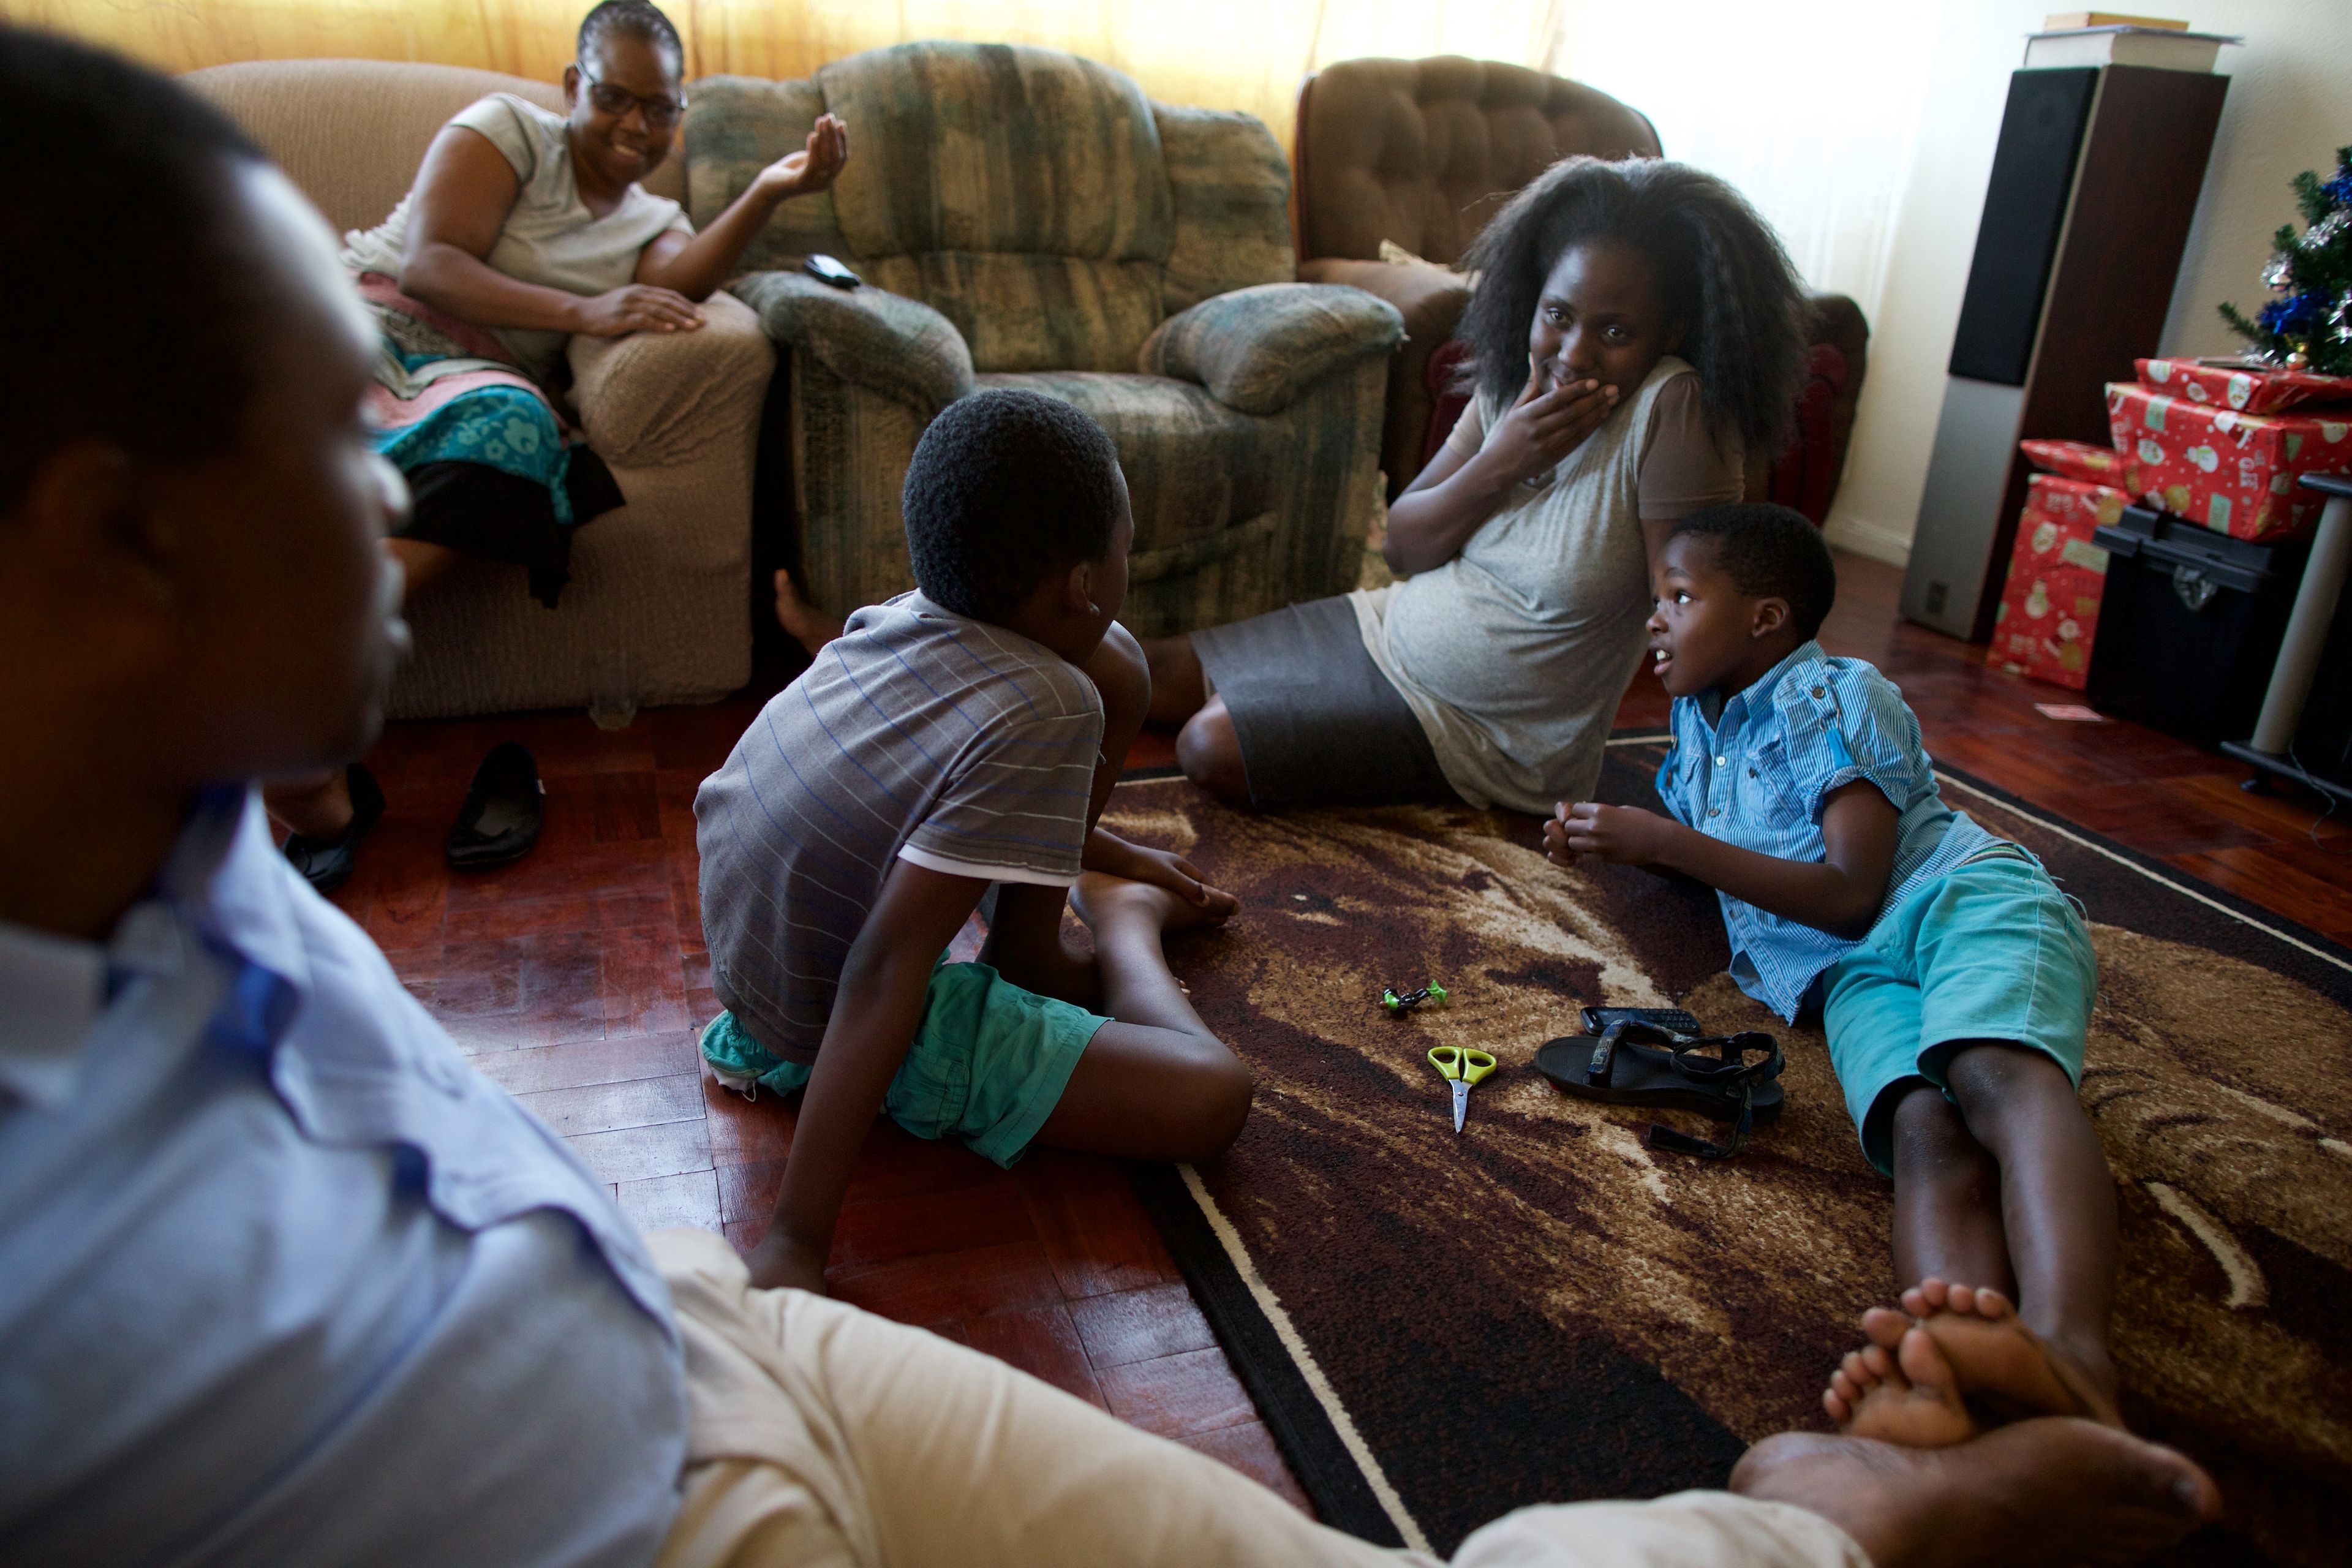 A South African family spends time together in their sitting room at Christmastime.